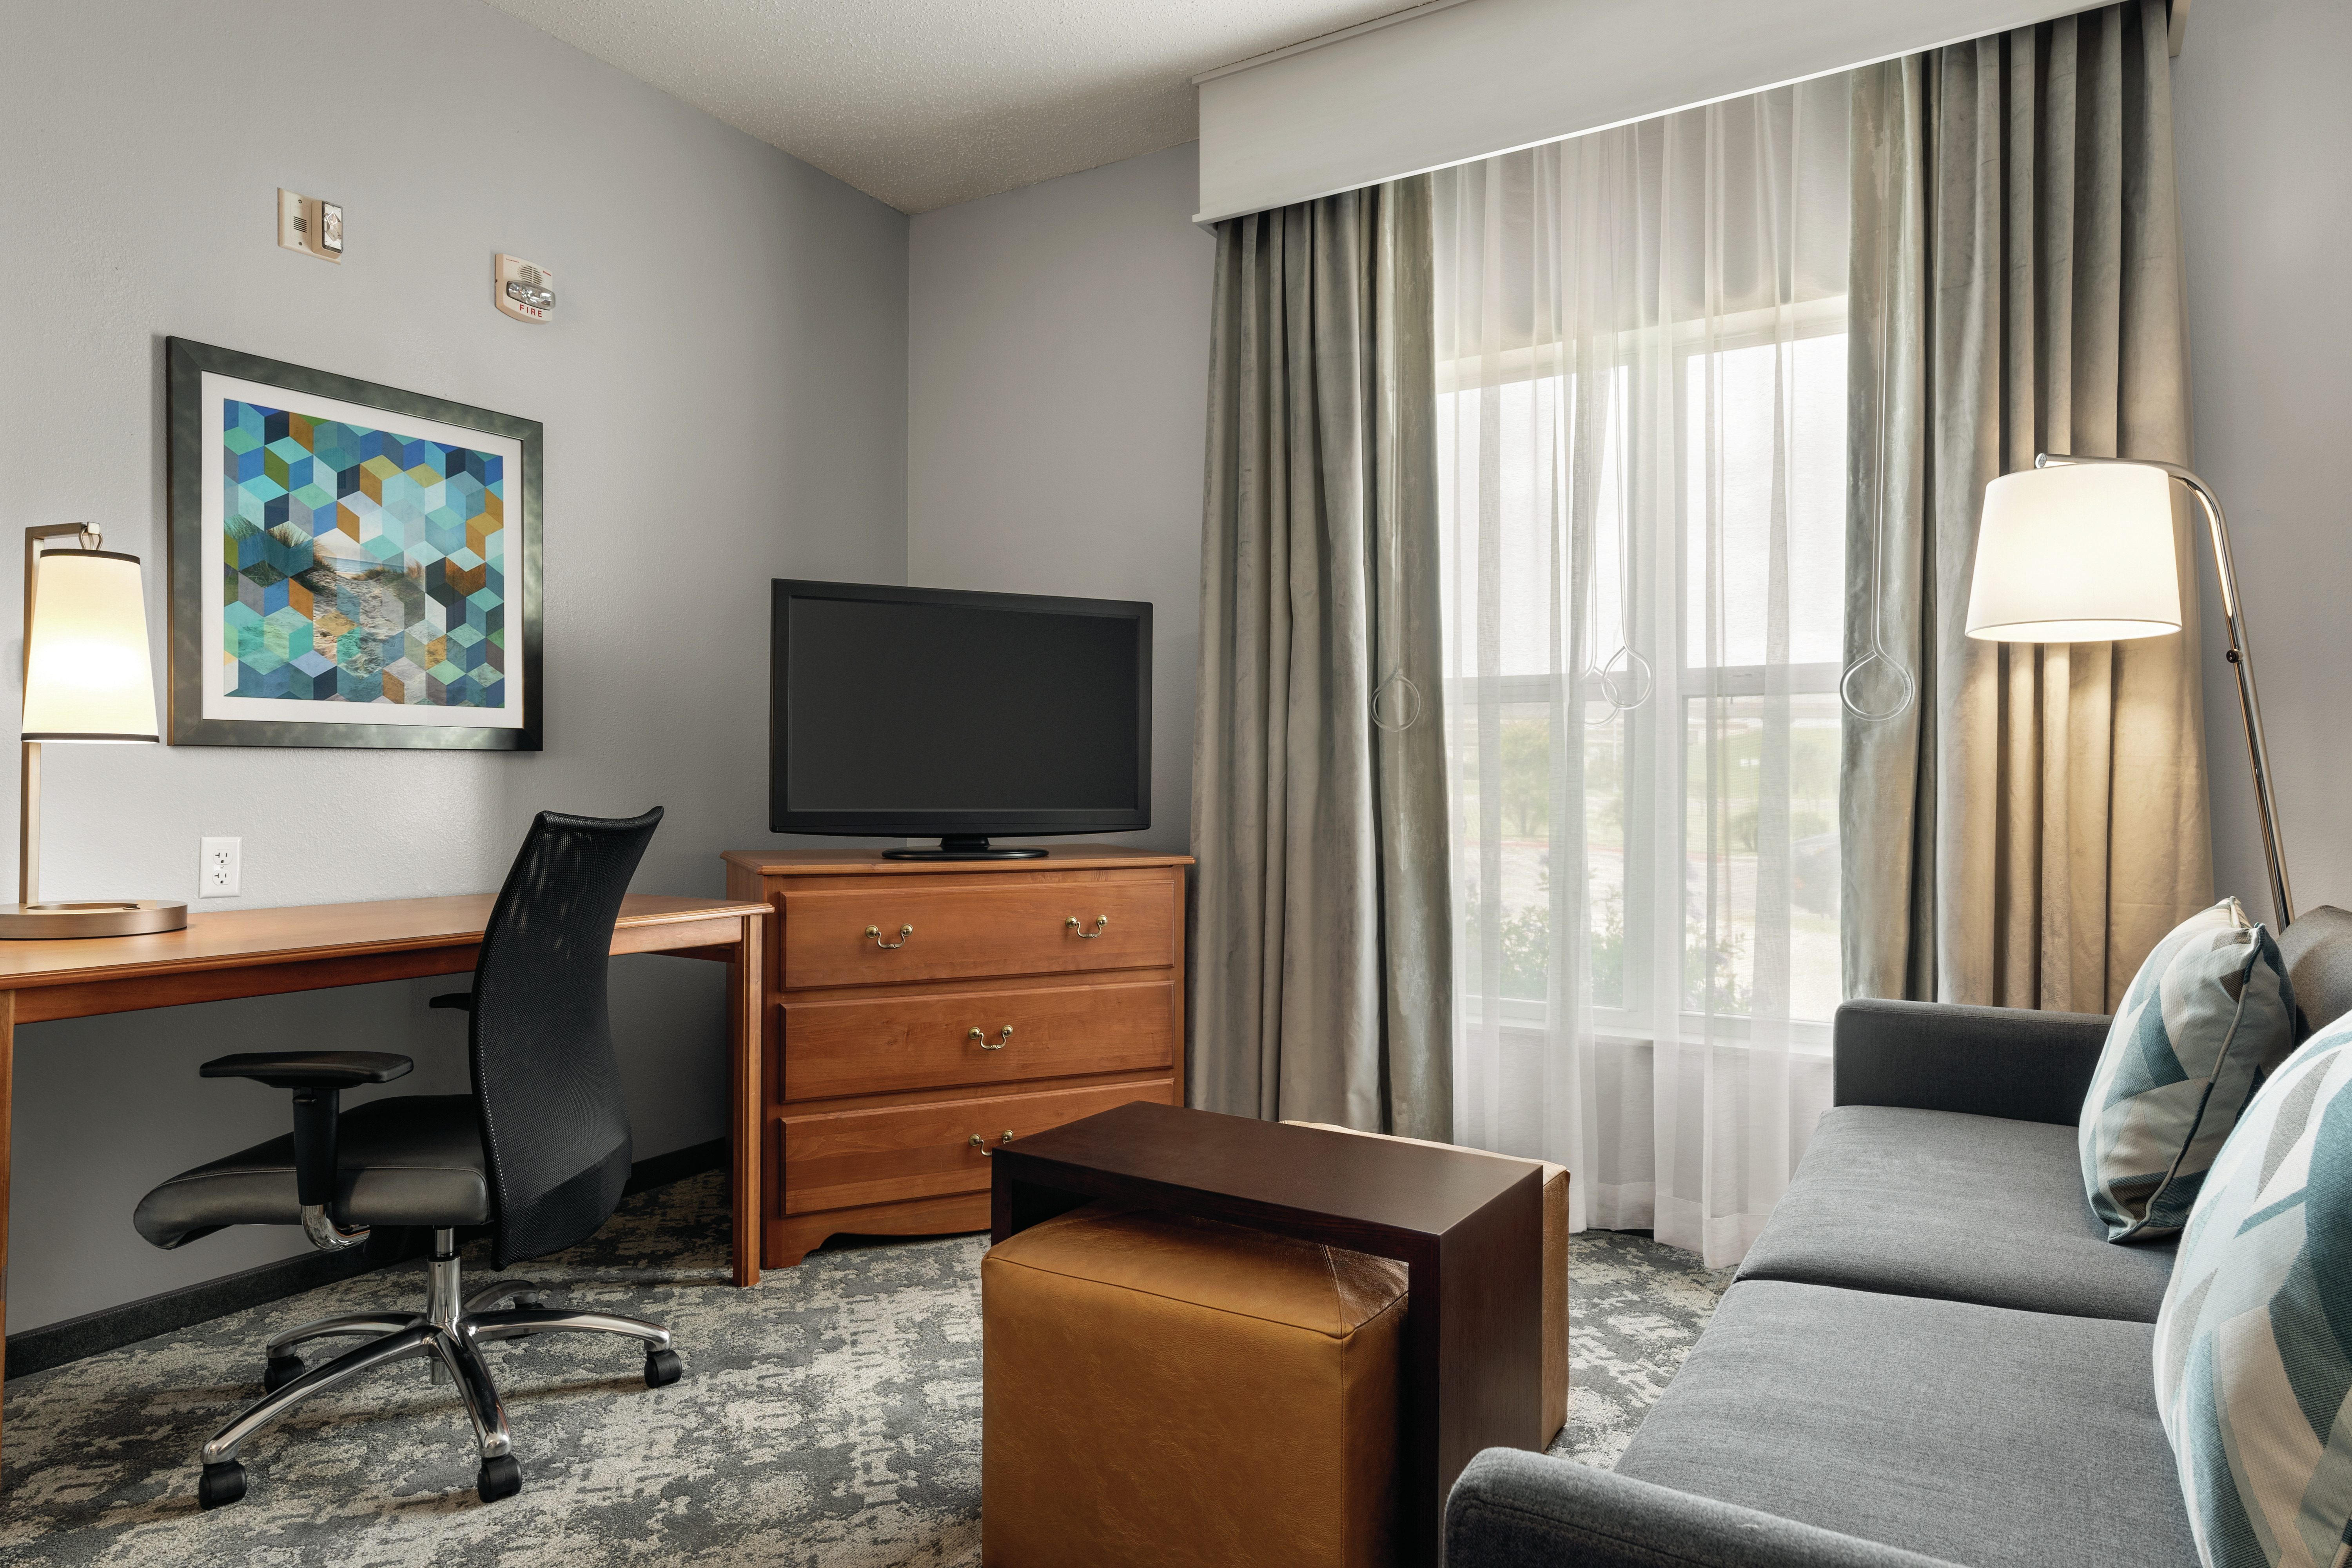 Guest Suite with Sofa, Footrest, Work Desk and TV